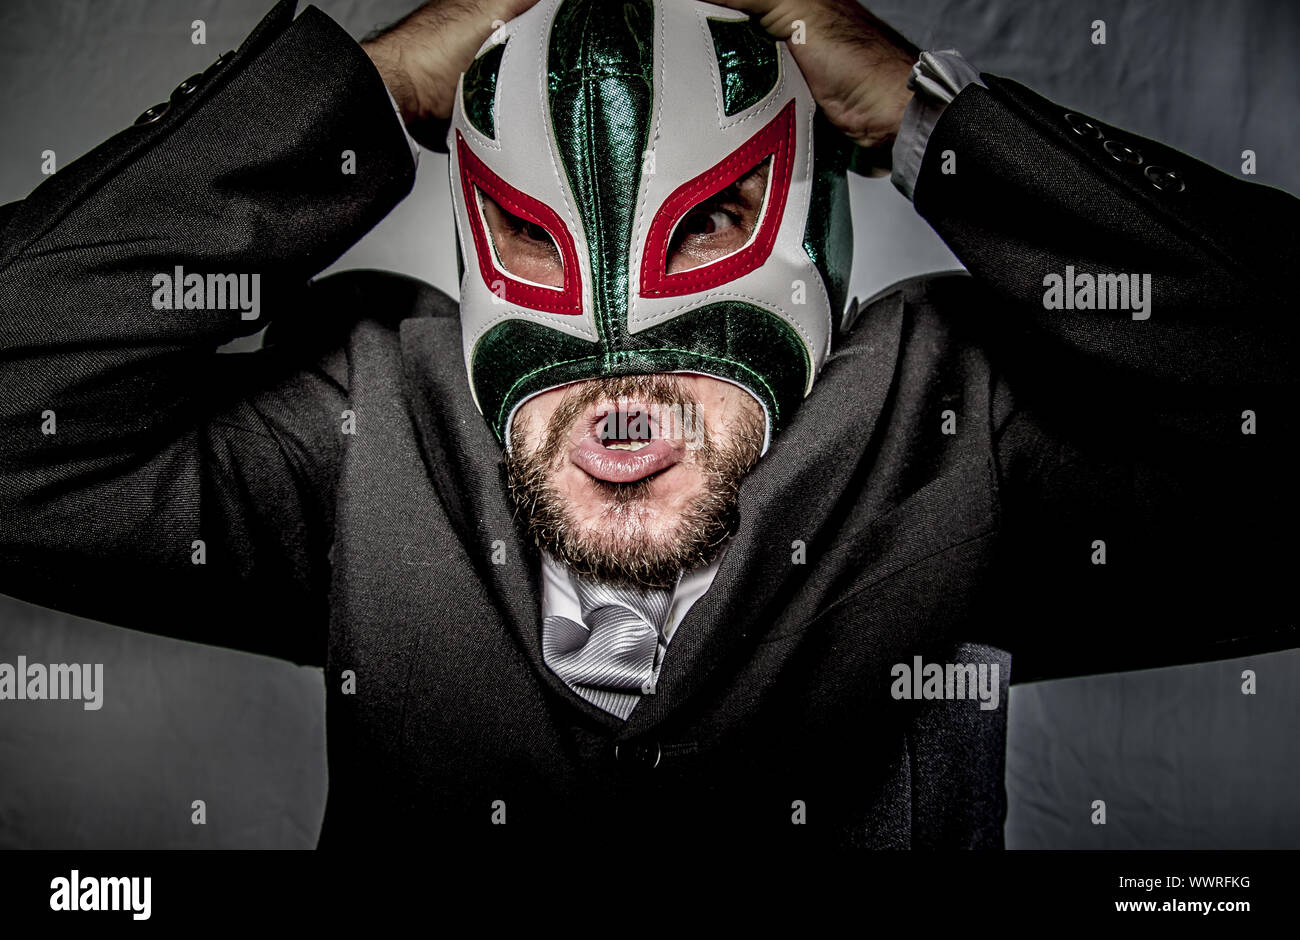 Angry businessman with mask of Mexican fighter, dressed in suit and tie Stock Photo